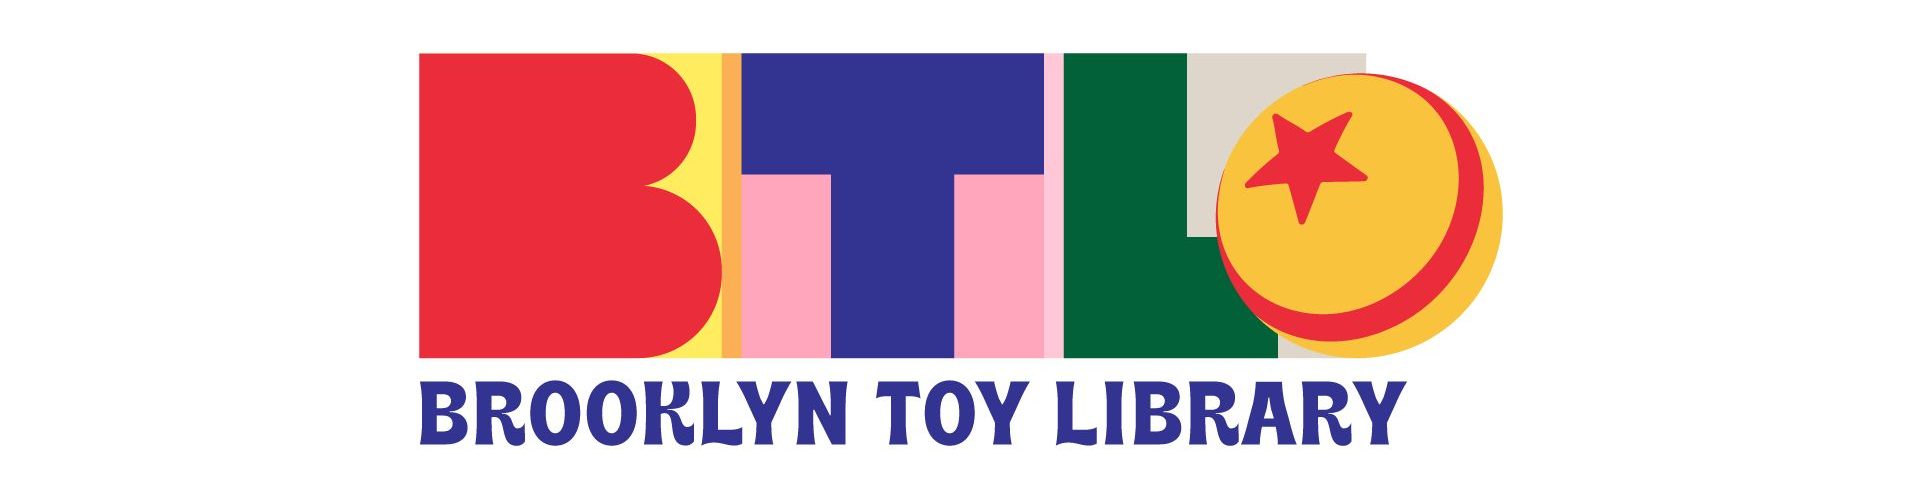 The Brooklyn Toy Library